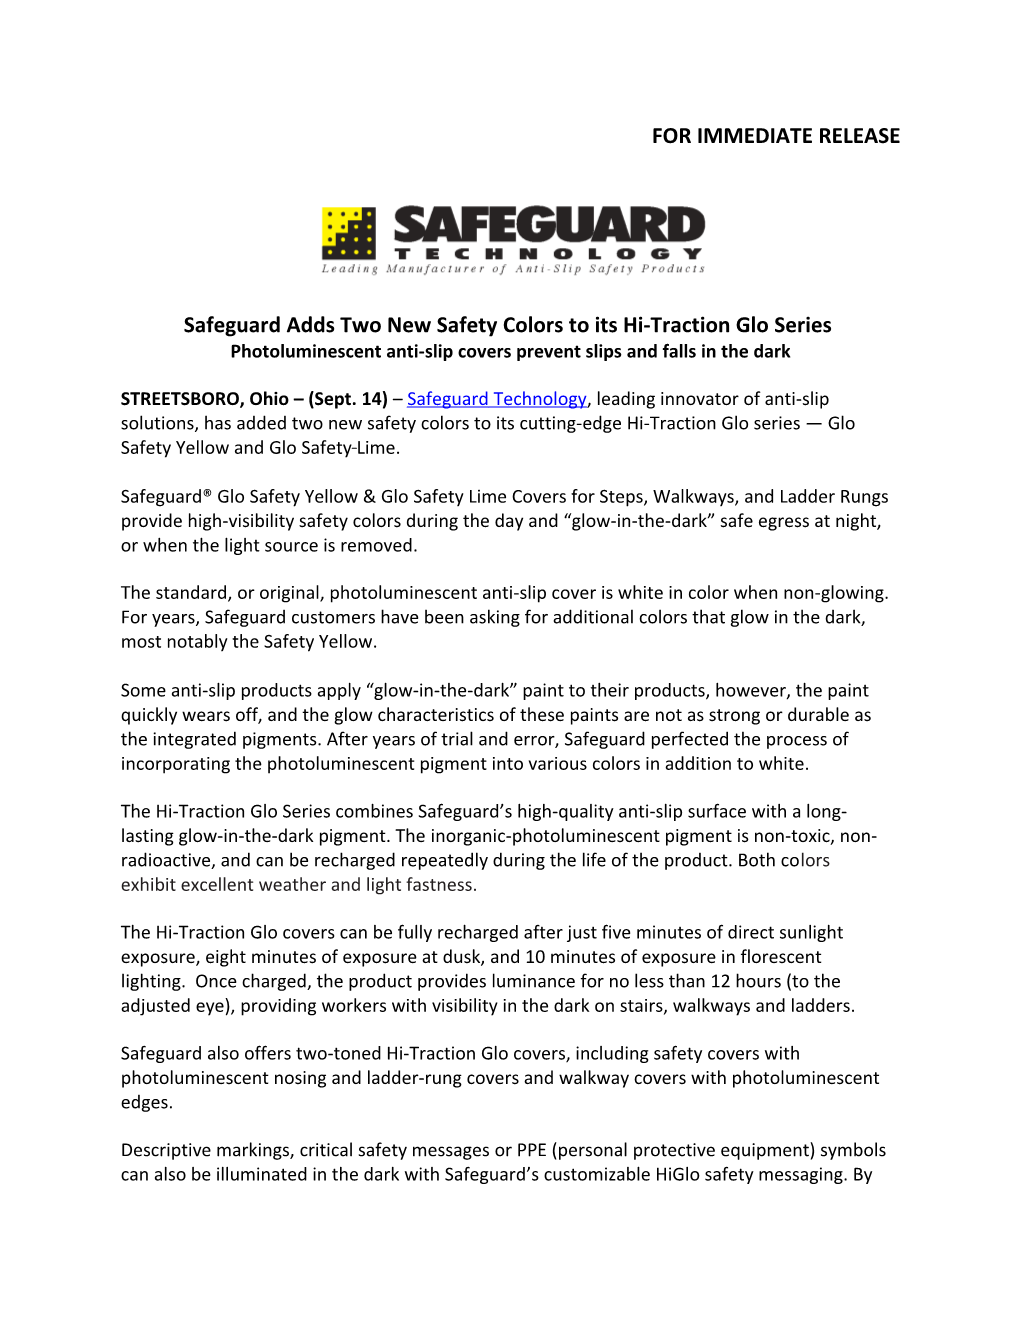 Safeguard Adds Two New Safety Colors to Its Hi-Traction Glo Series